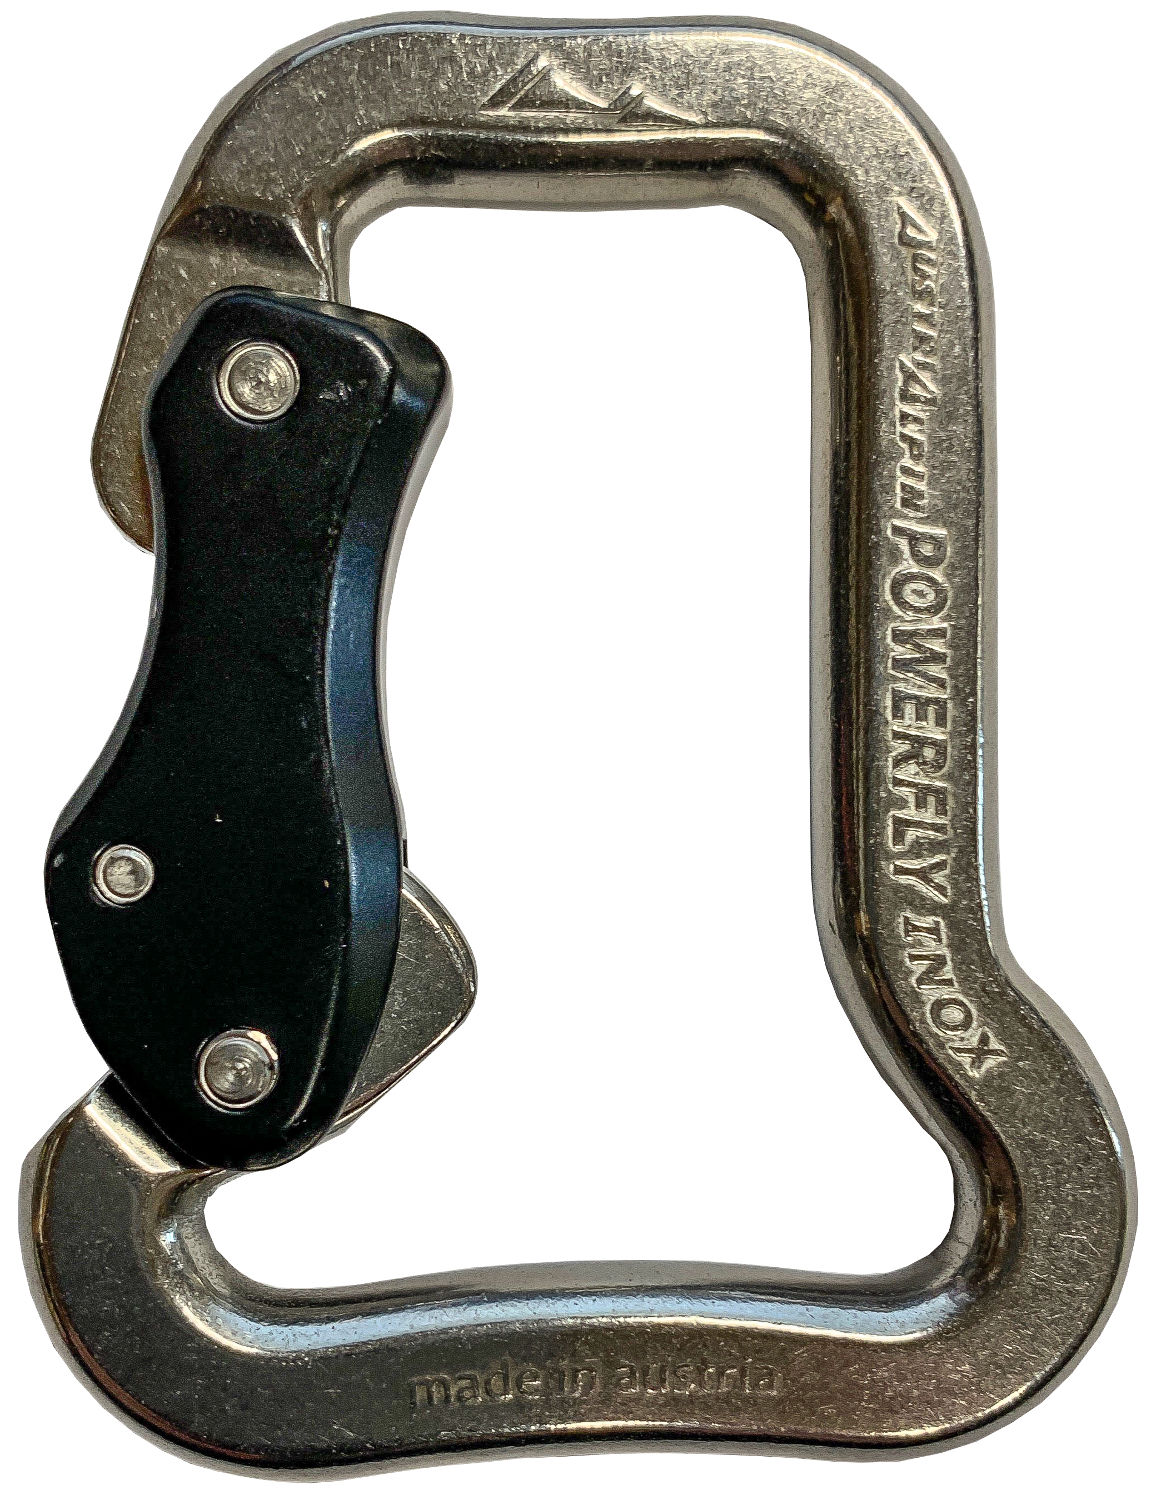 Supair Steel Self-Locking Carabiner for Paraglider and PPG biners 